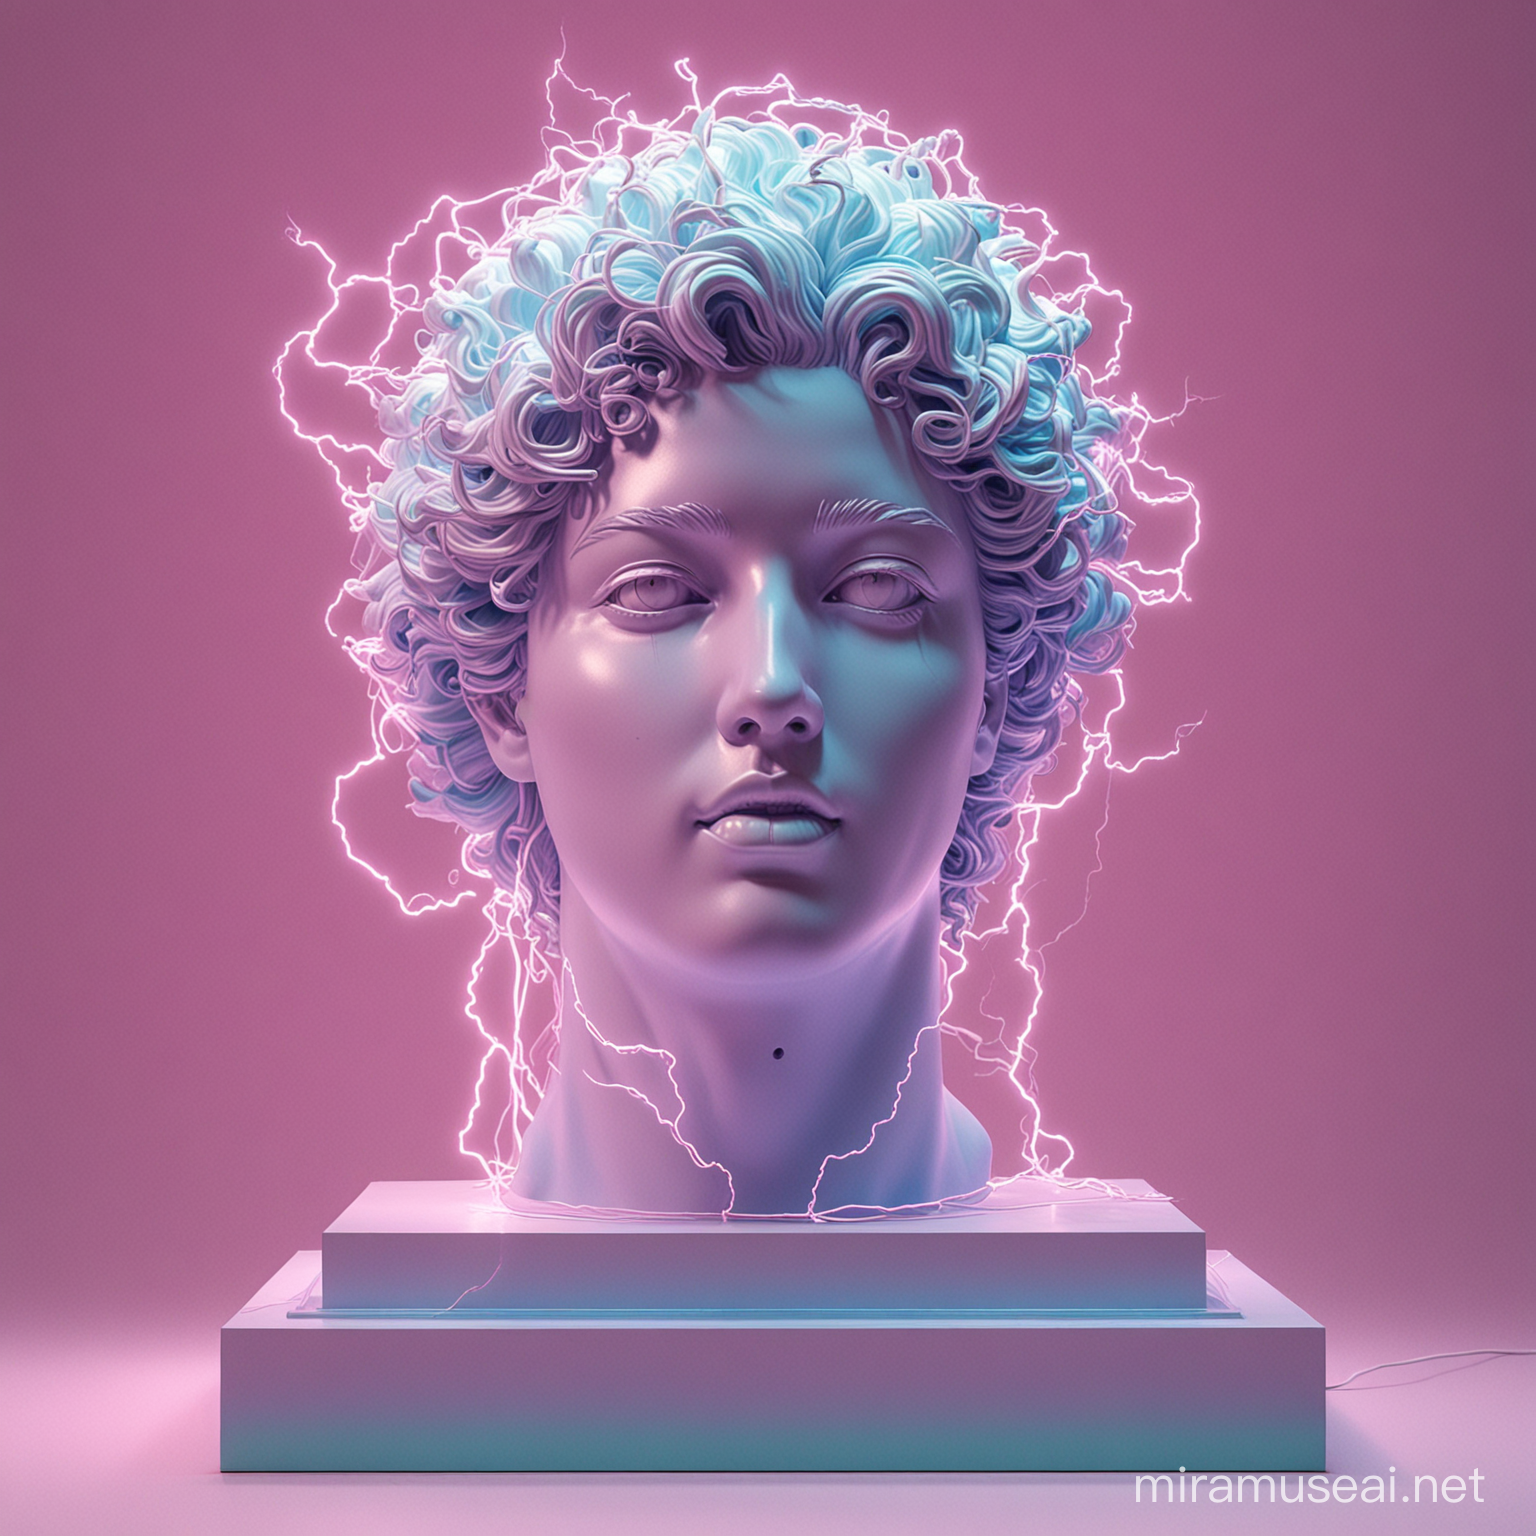 ElectricityCharged Vaporwave Sculpture Illuminated in Neon Colors